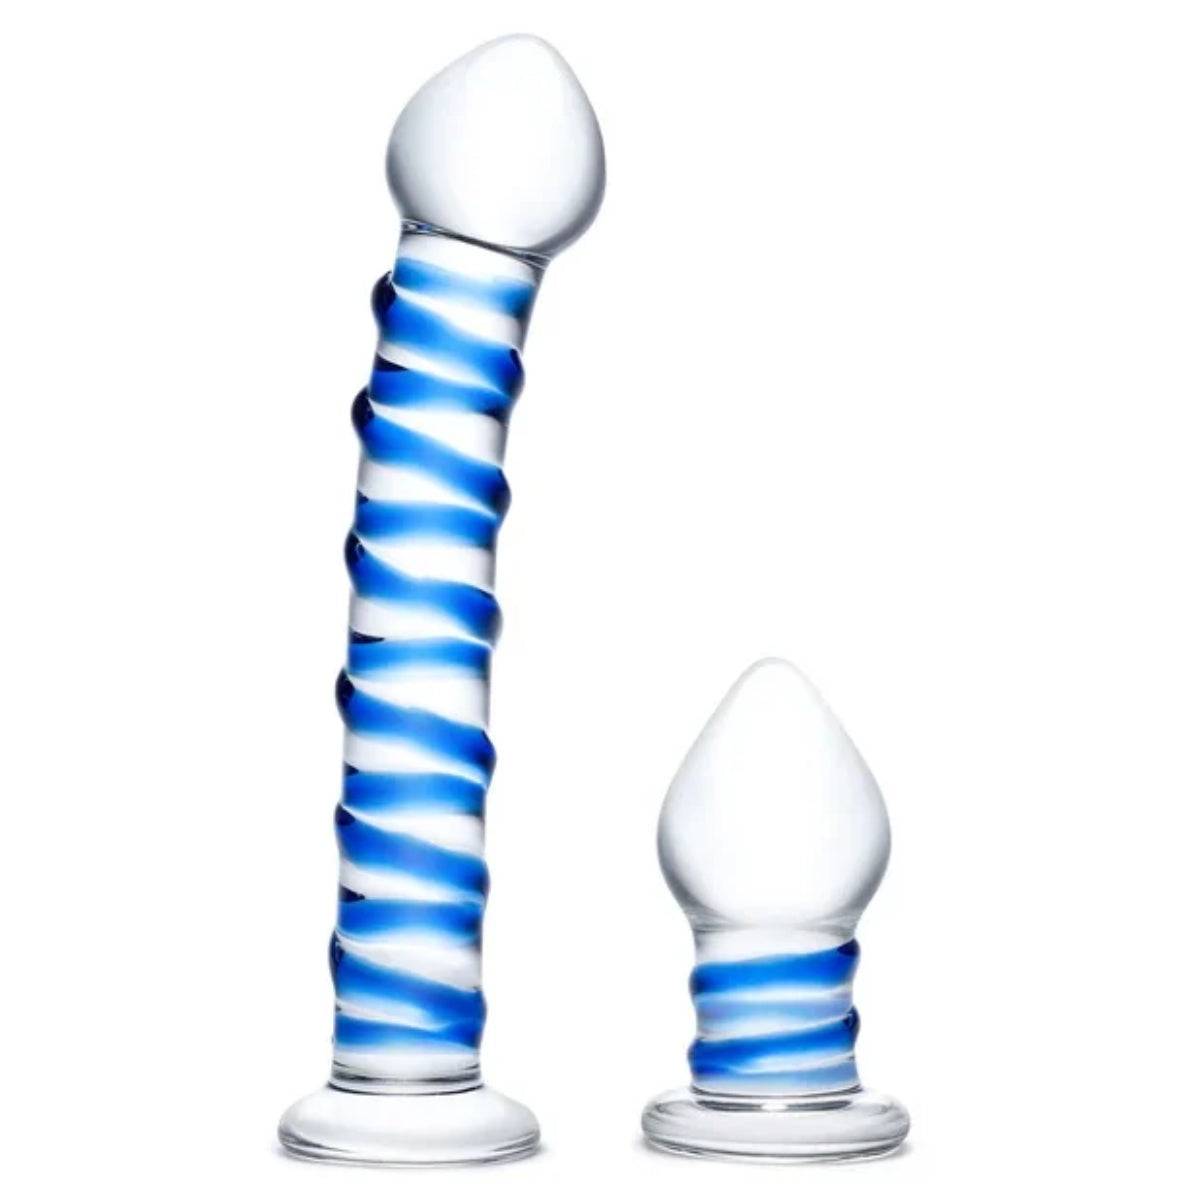 Glas Double Penetration Swirly Dildo And Butt Plug Set Blue 2.75 Inch 7 Inch - Simply Pleasure